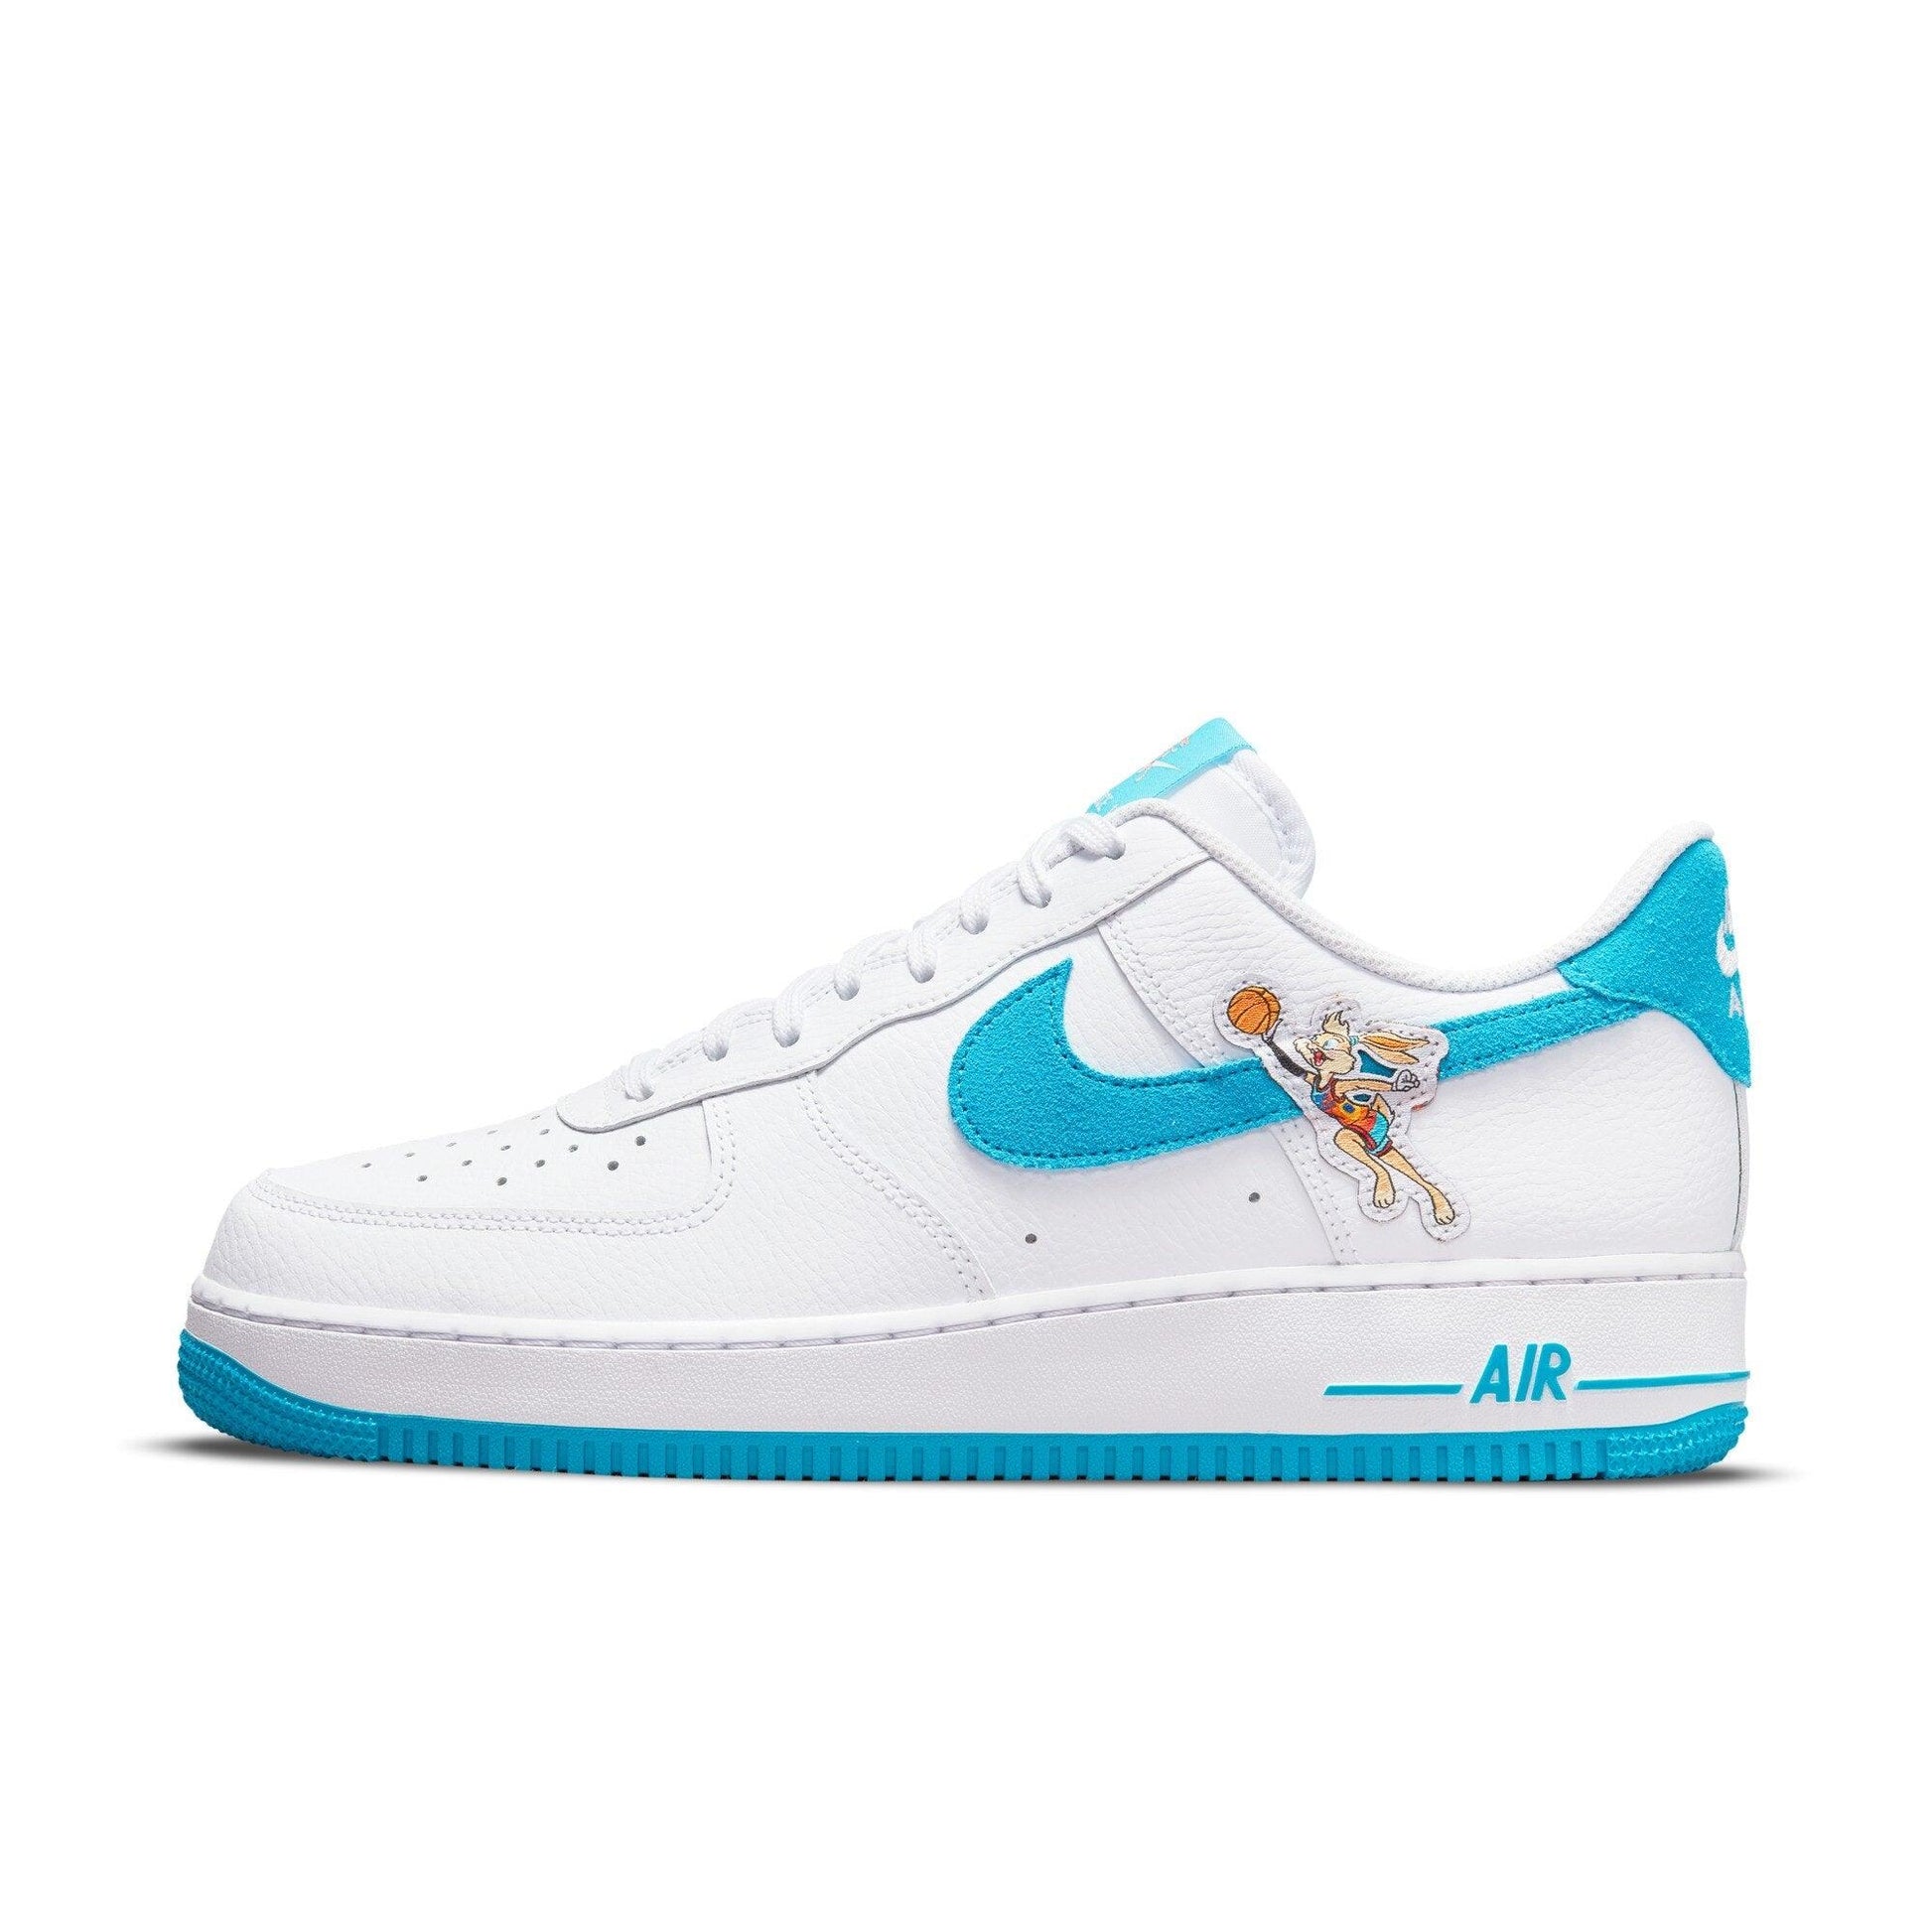 Nike Air Force 1 Men Sneakers New Air Force One Shoes - CADEAUME